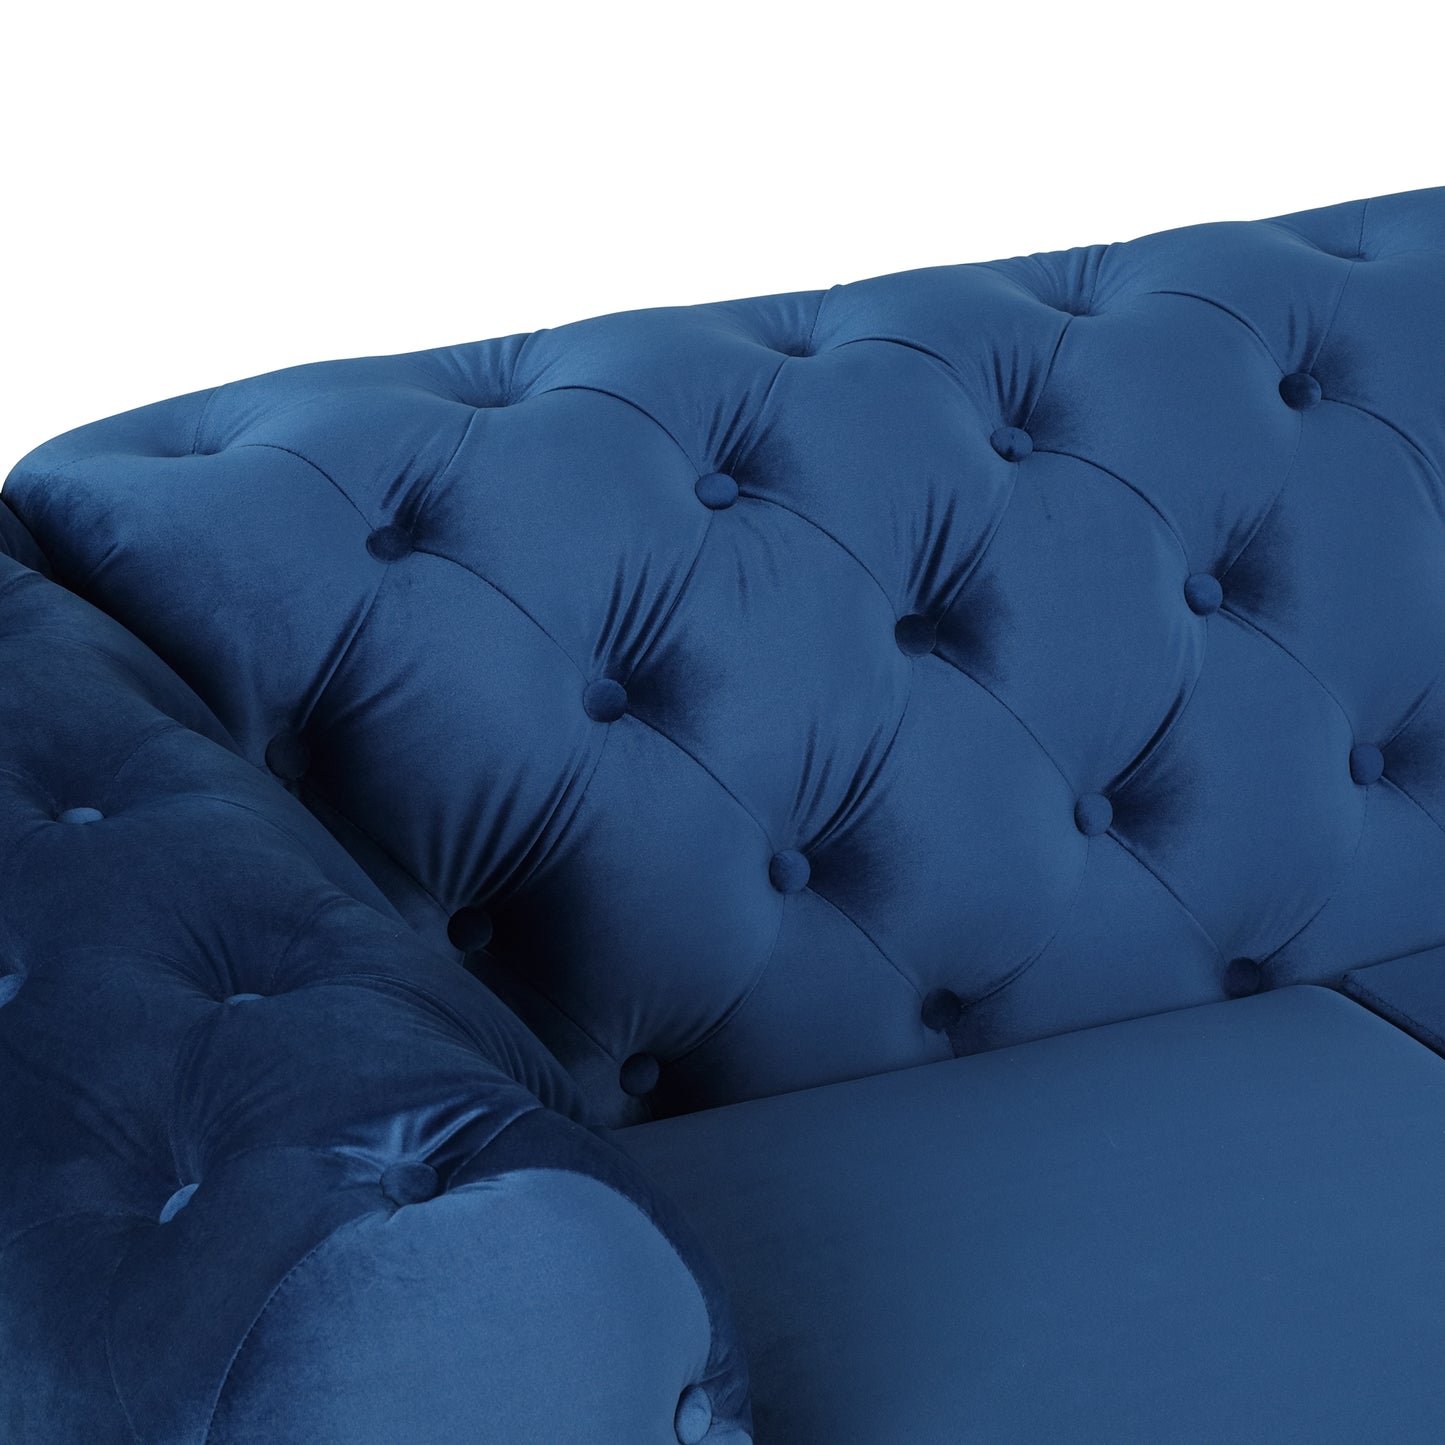 Velvet Upholstered Accent Chair with Button Tufted Back, Ideal for Living Room, Bedroom, or Small Spaces - 40.5 Inch, Blue